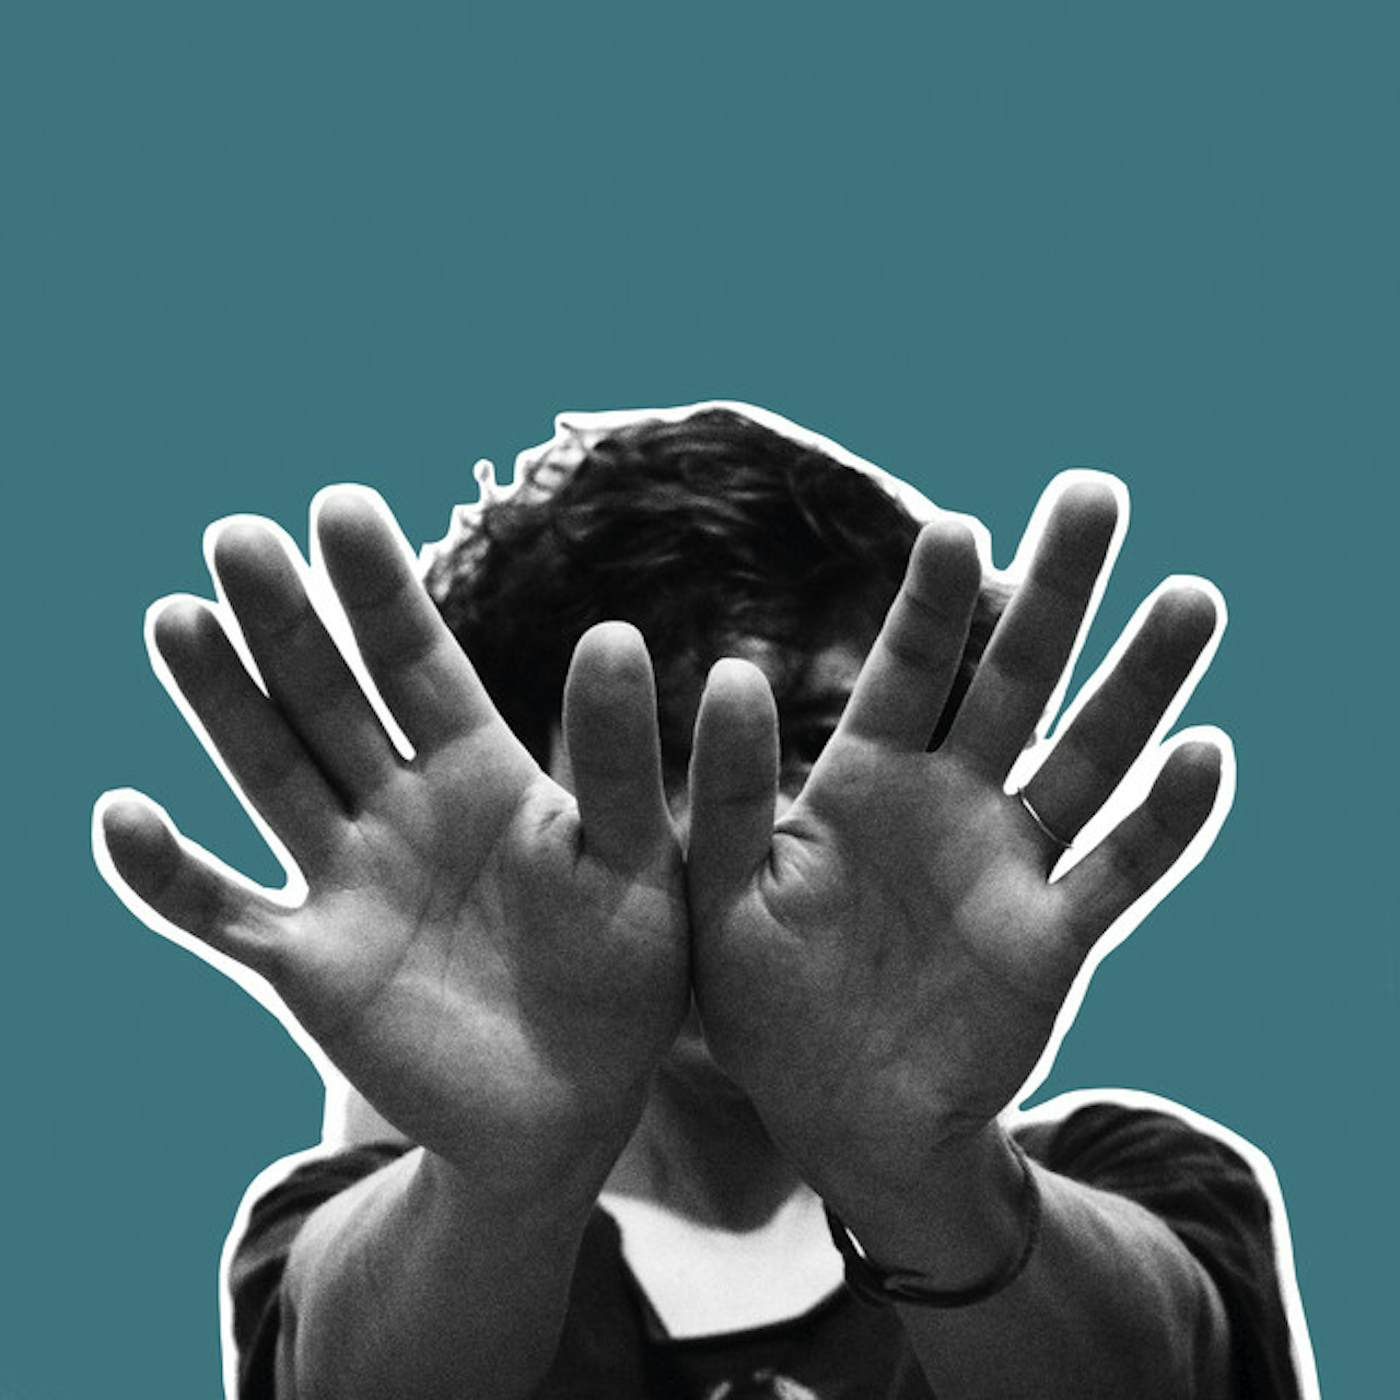 Tune-Yards I CAN FEEL YOU CREEP INTO MY PRIVATE LIFE CD